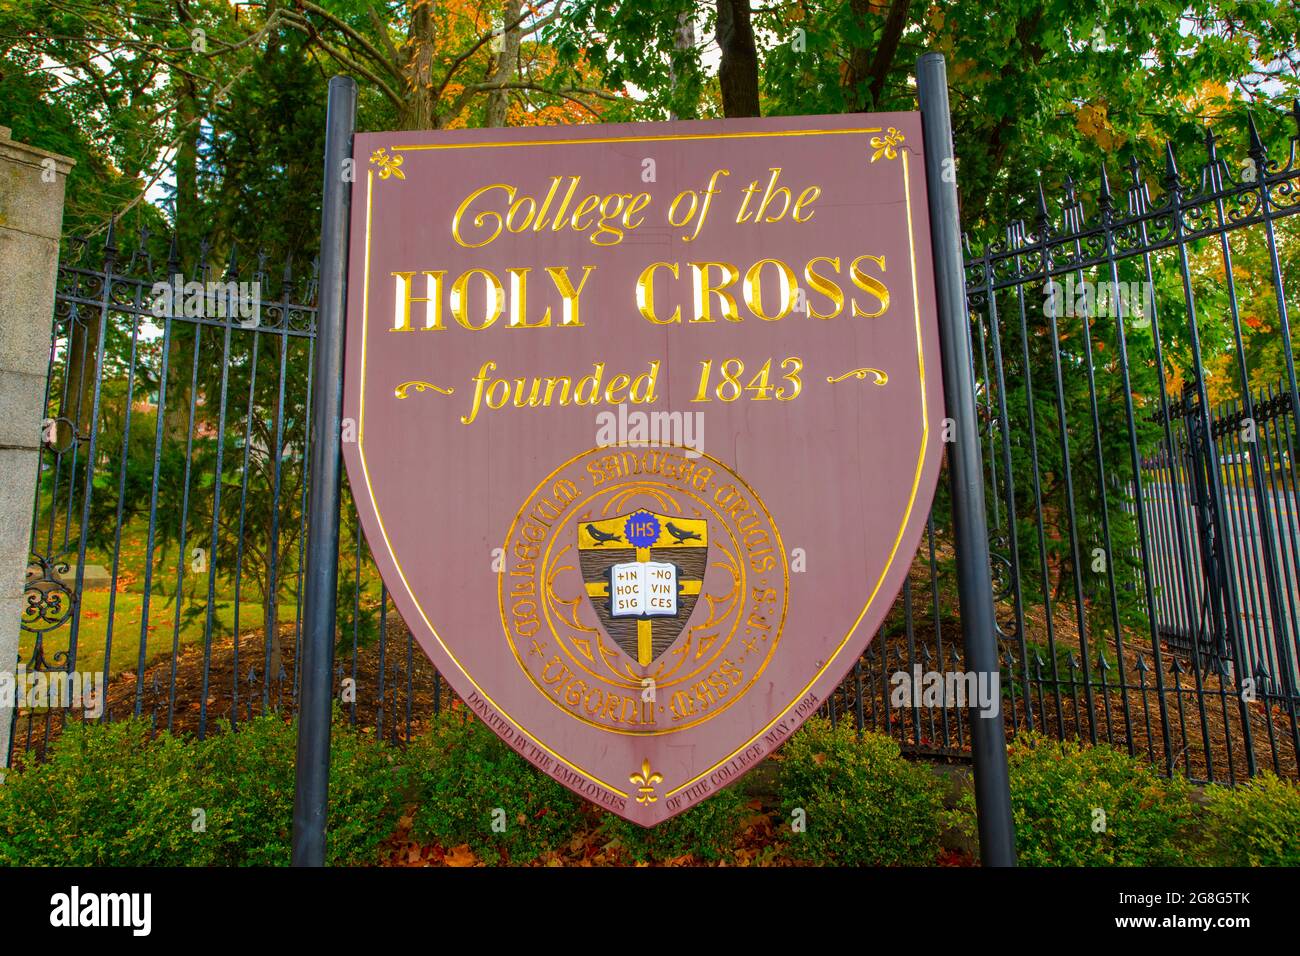 College of the Holy Cross at 1 College Street in Worcester, Massachusetts MA, USA. Stock Photo